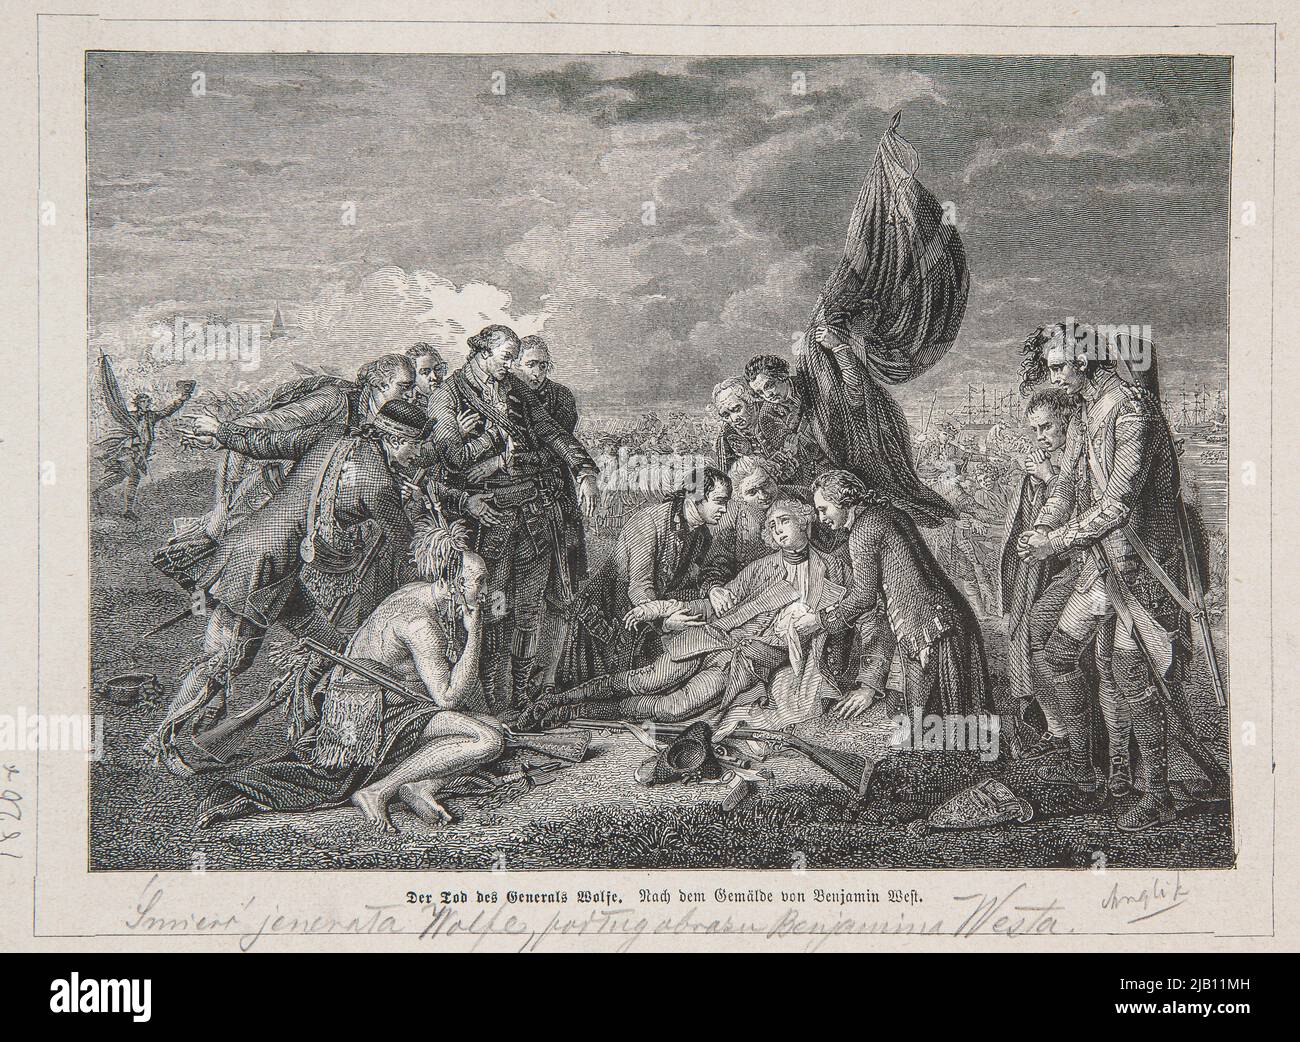 The death of General Wolf according to the image of Benjamin West. A clip from a German magazine unknown, West, Benjamin (1738 1820) Stock Photo